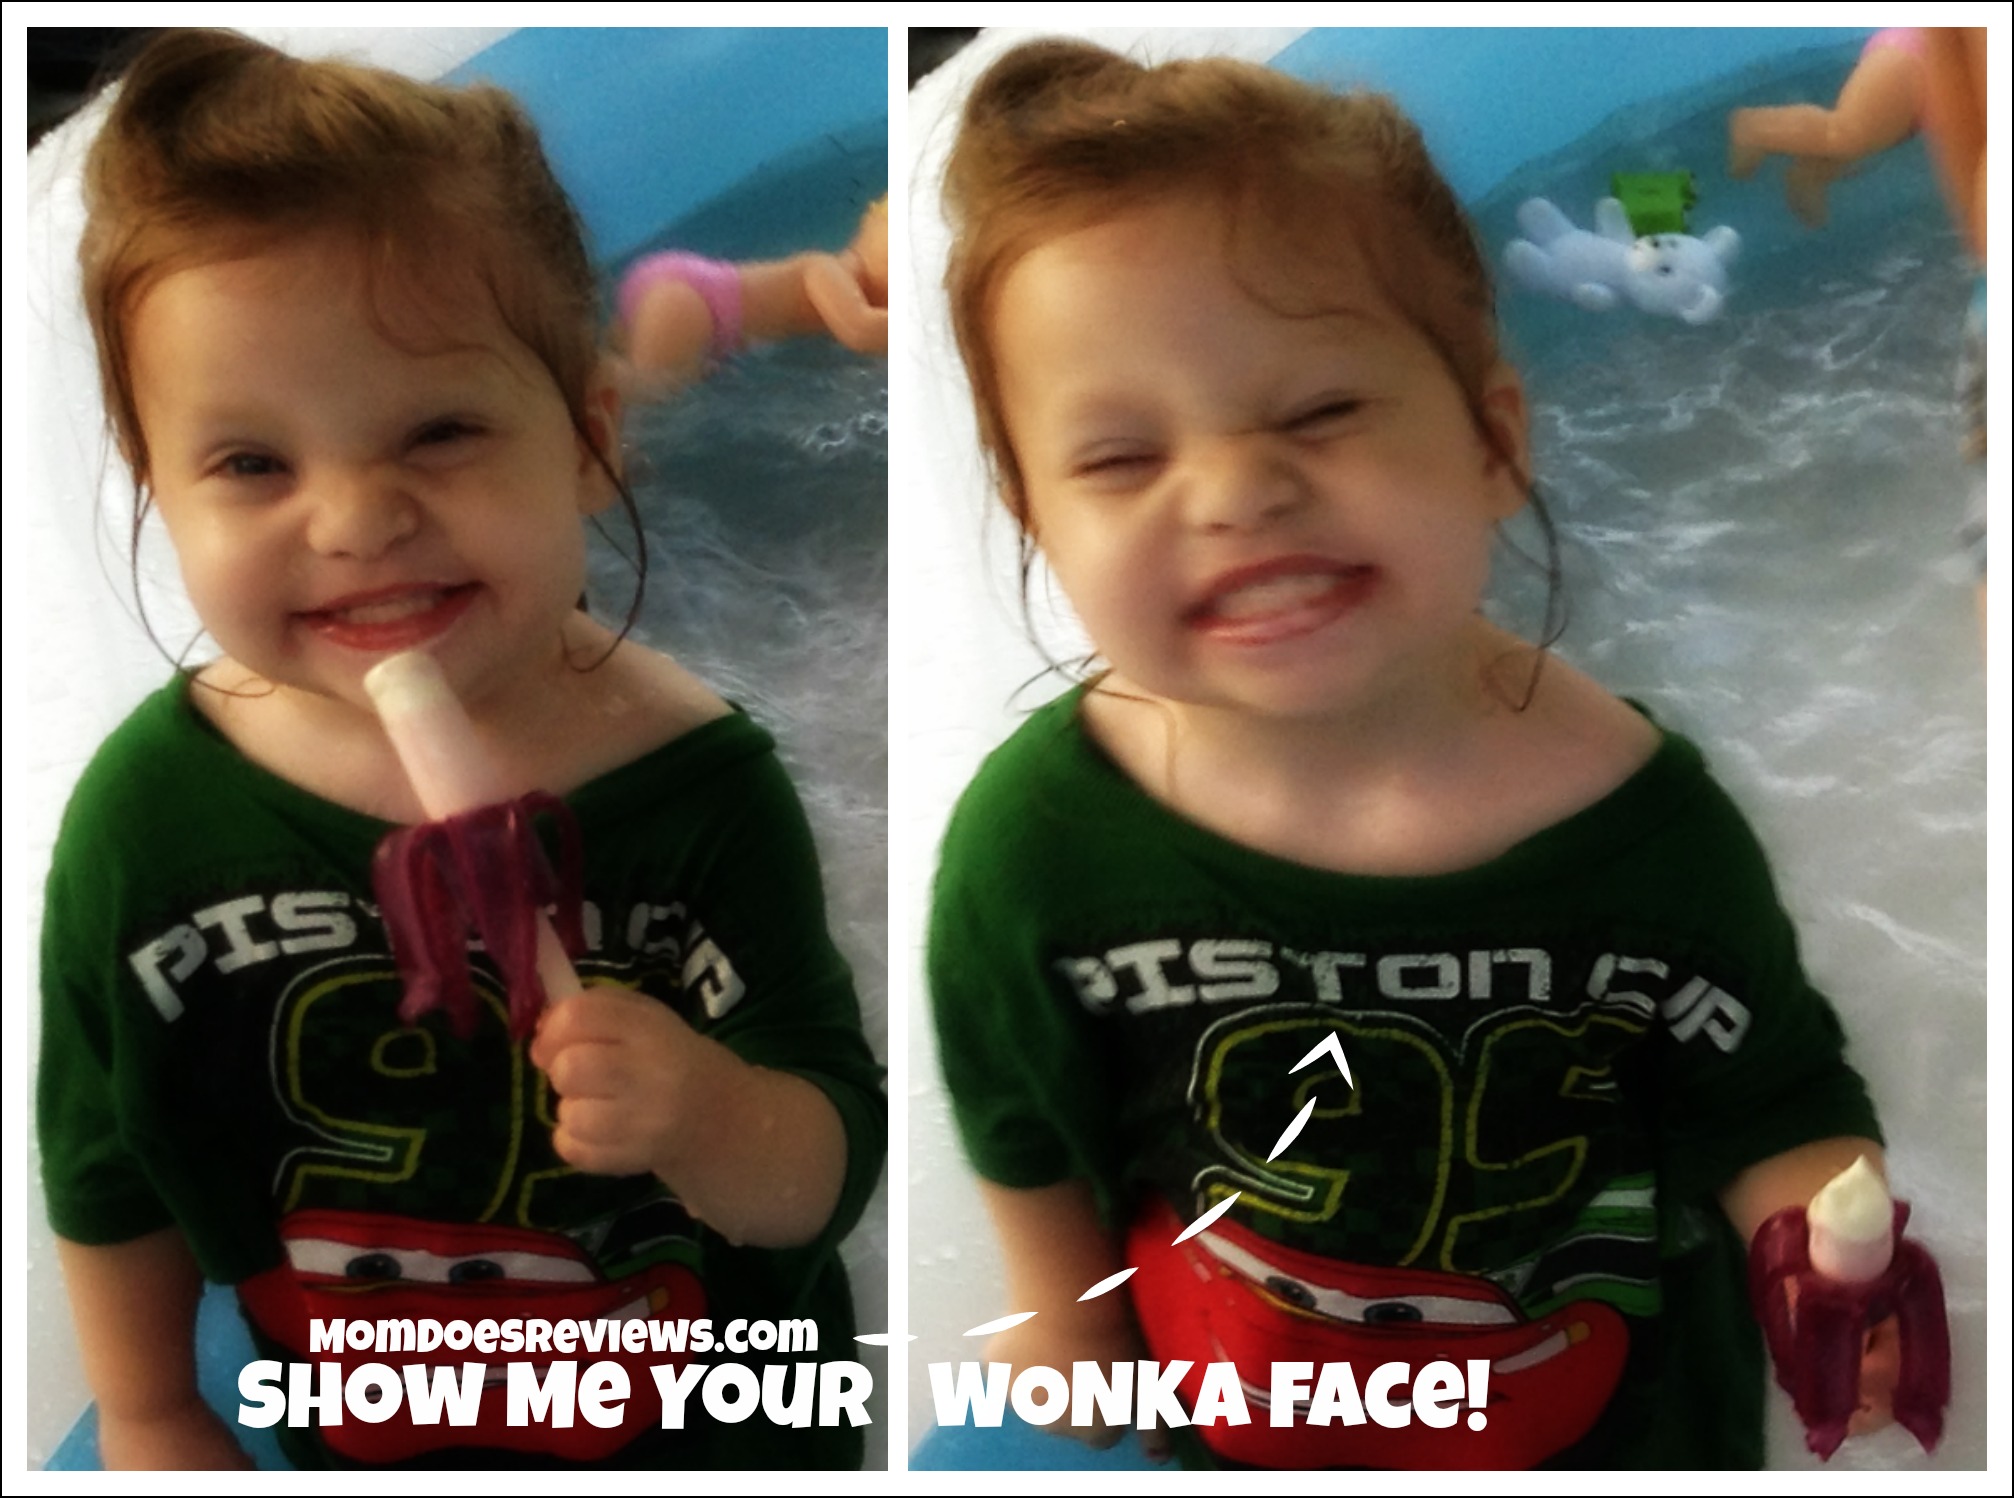 Show Me Your #WonkaFace at MomDoesReviews.com